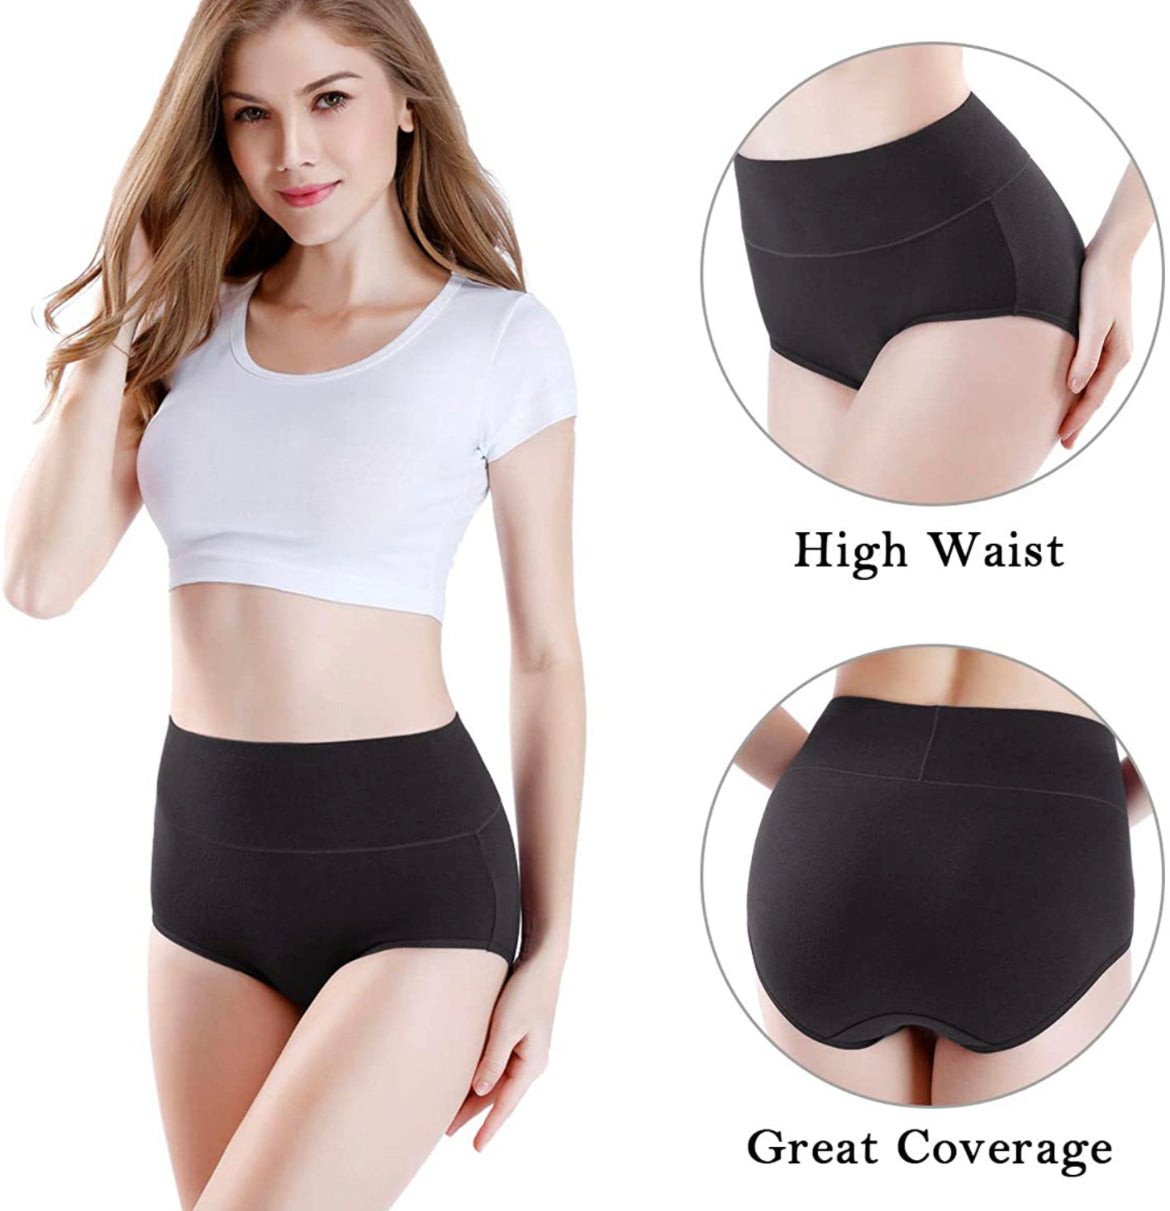 wirarpa Women's High Waisted Cotton Underwear Soft Full Briefs Ladies Breathable Panties Multipack.